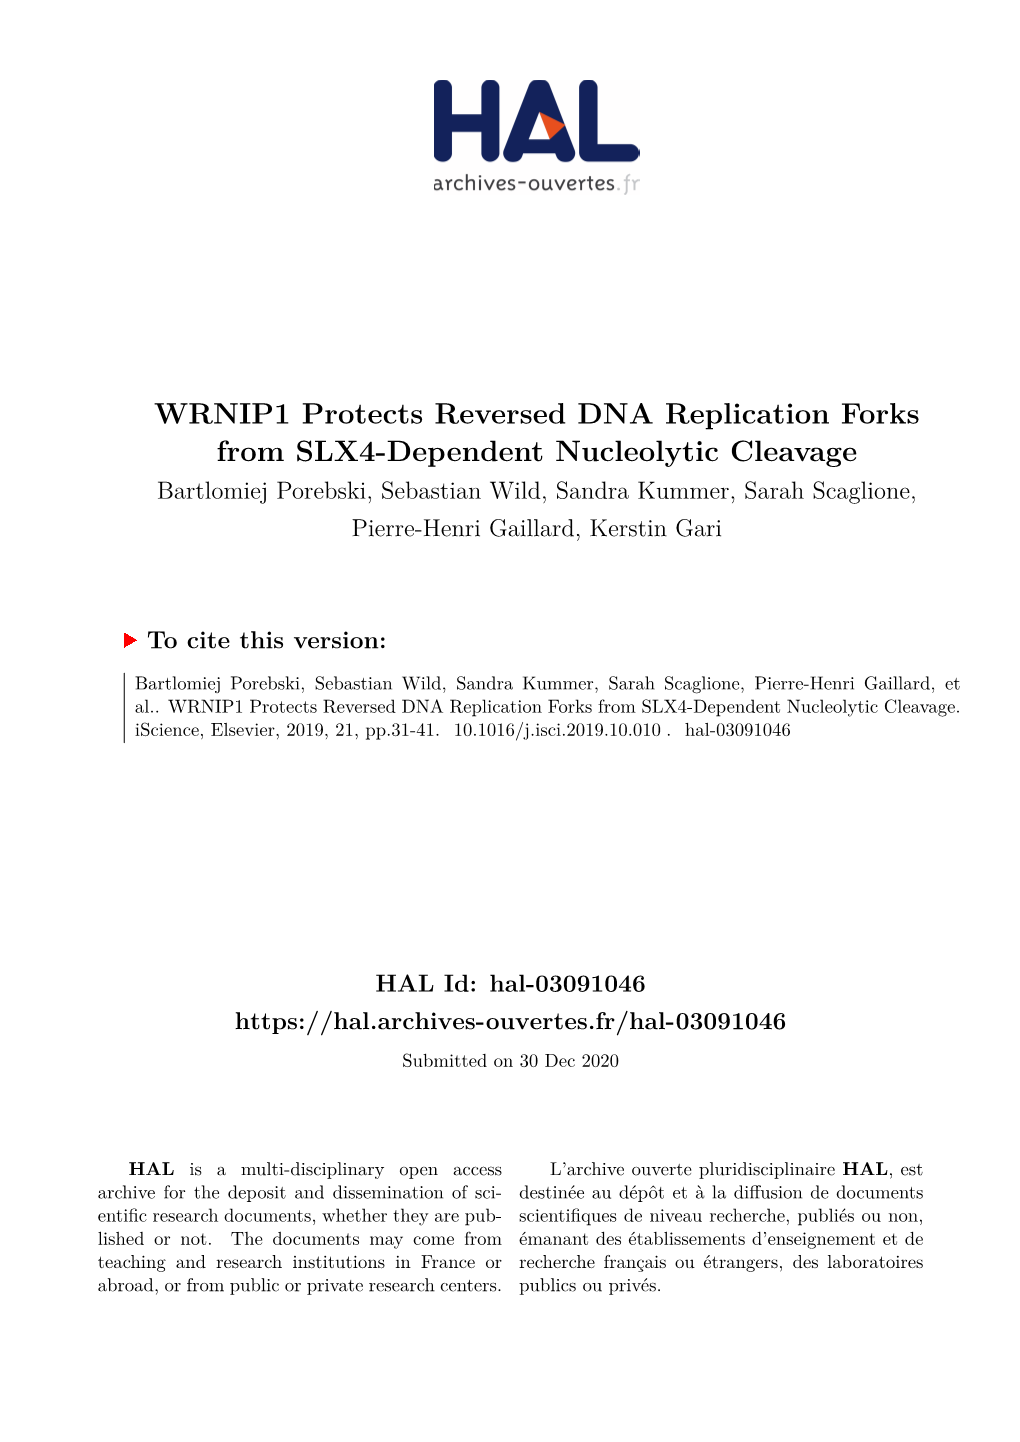 WRNIP1 Protects Reversed DNA Replication Forks from SLX4